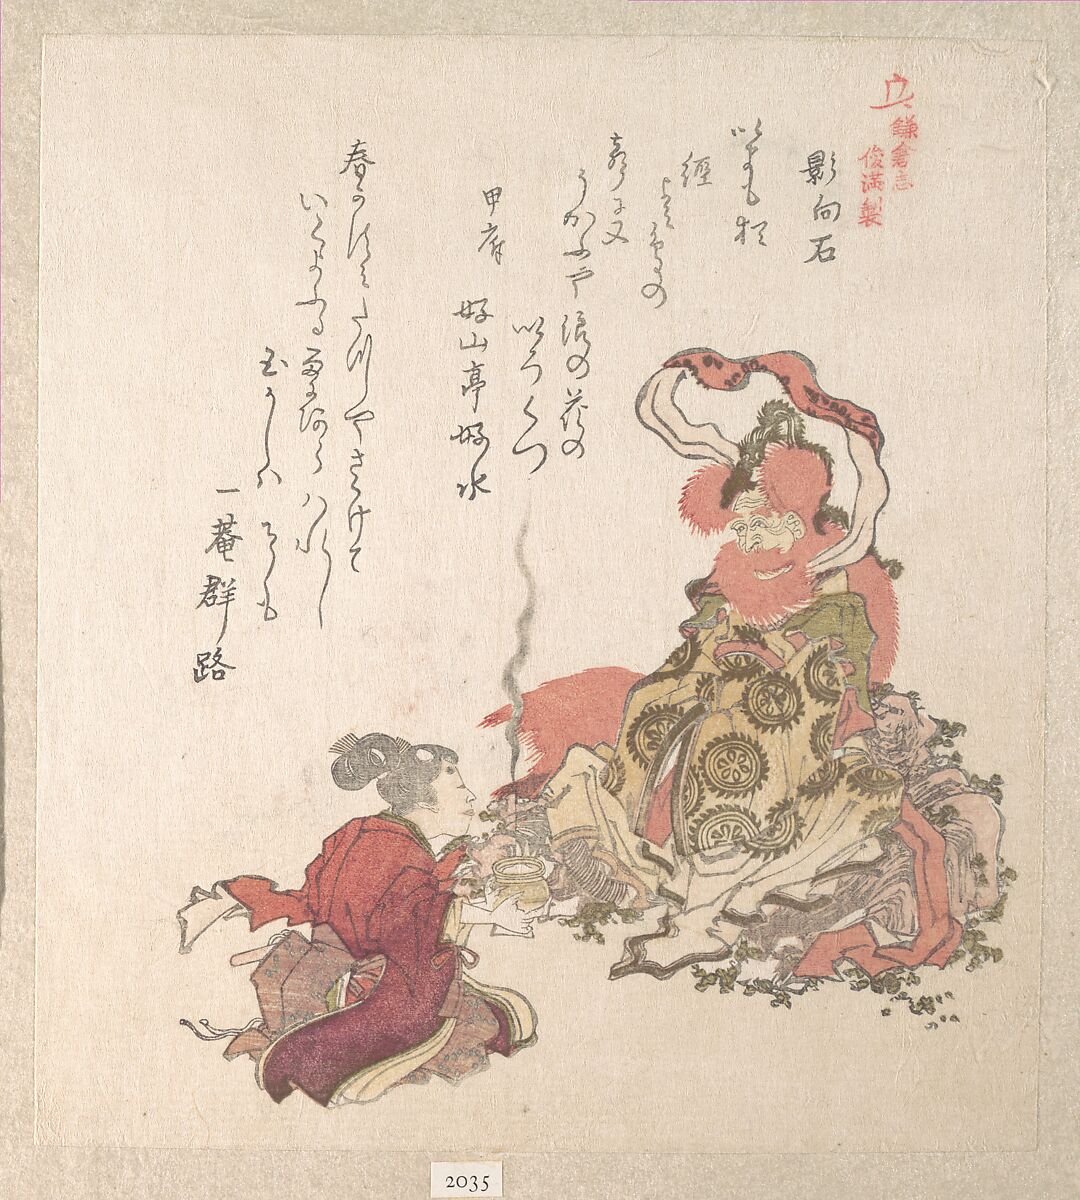 Spring Rain Collection (Harusame shū), vol. 1: “Offering Incense to the Deity of the Stone” (Yōgōishi), from the series History of Kamakura (Kamakura shi), Kubo Shunman (Japanese, 1757–1820), Privately published woodblock prints (surimono) mounted in an album; ink and color on paper, Japan 